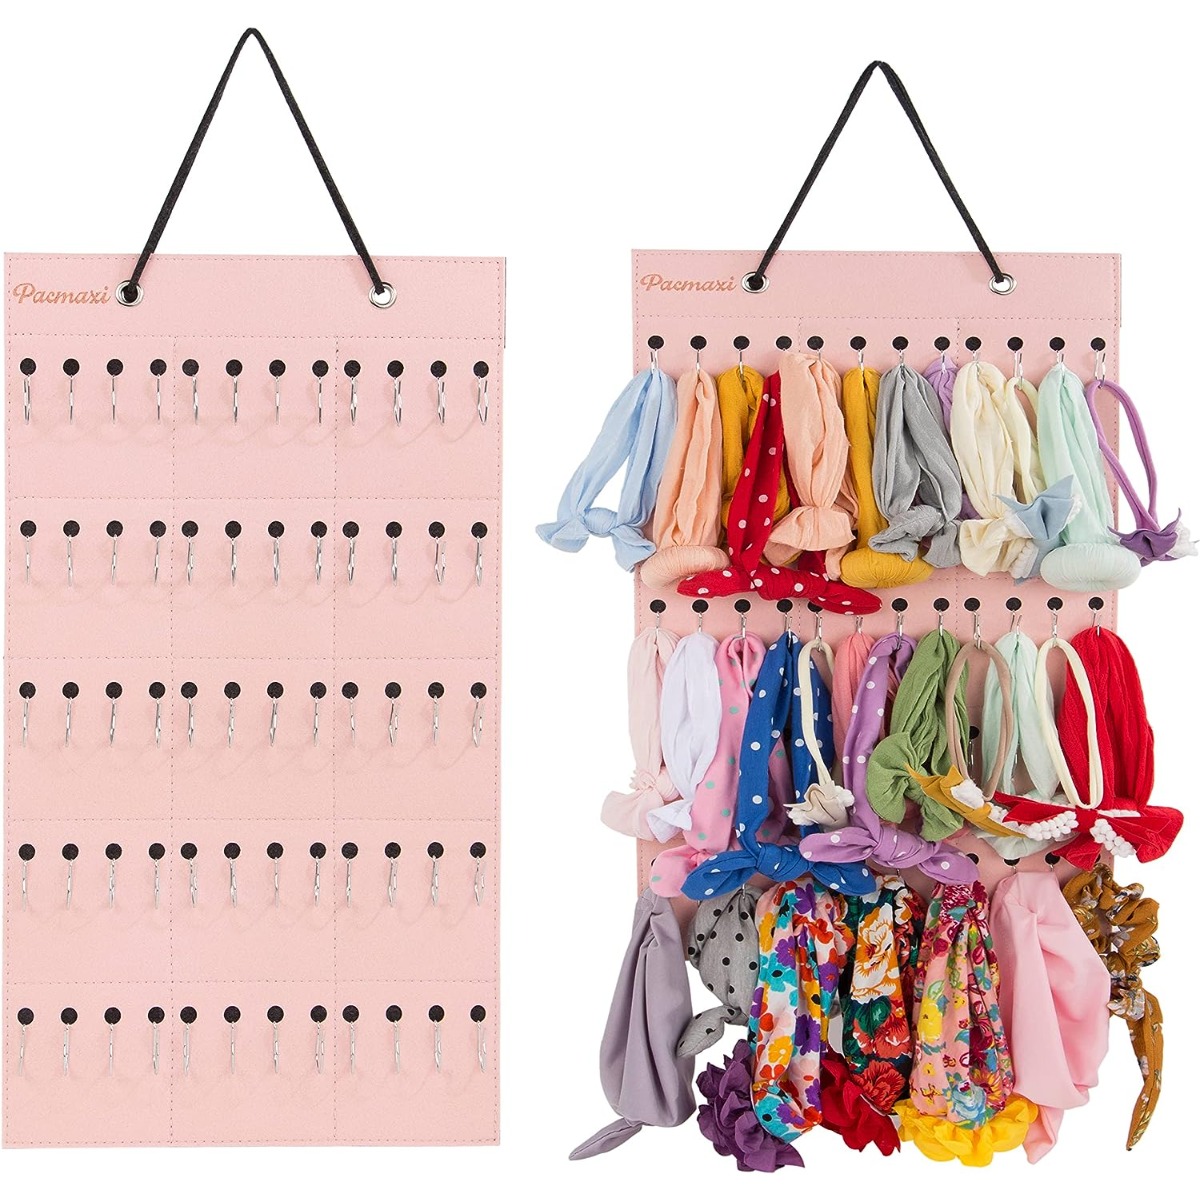  2 Pack Wall Hanging Bow Holder with 20 Hooks Hair Bow Holder  Organizer for Girls Hanger Headband Storage Organizer Include 40 Metal Bow  Hanger Clips Bows 2 16 - 28 Inch